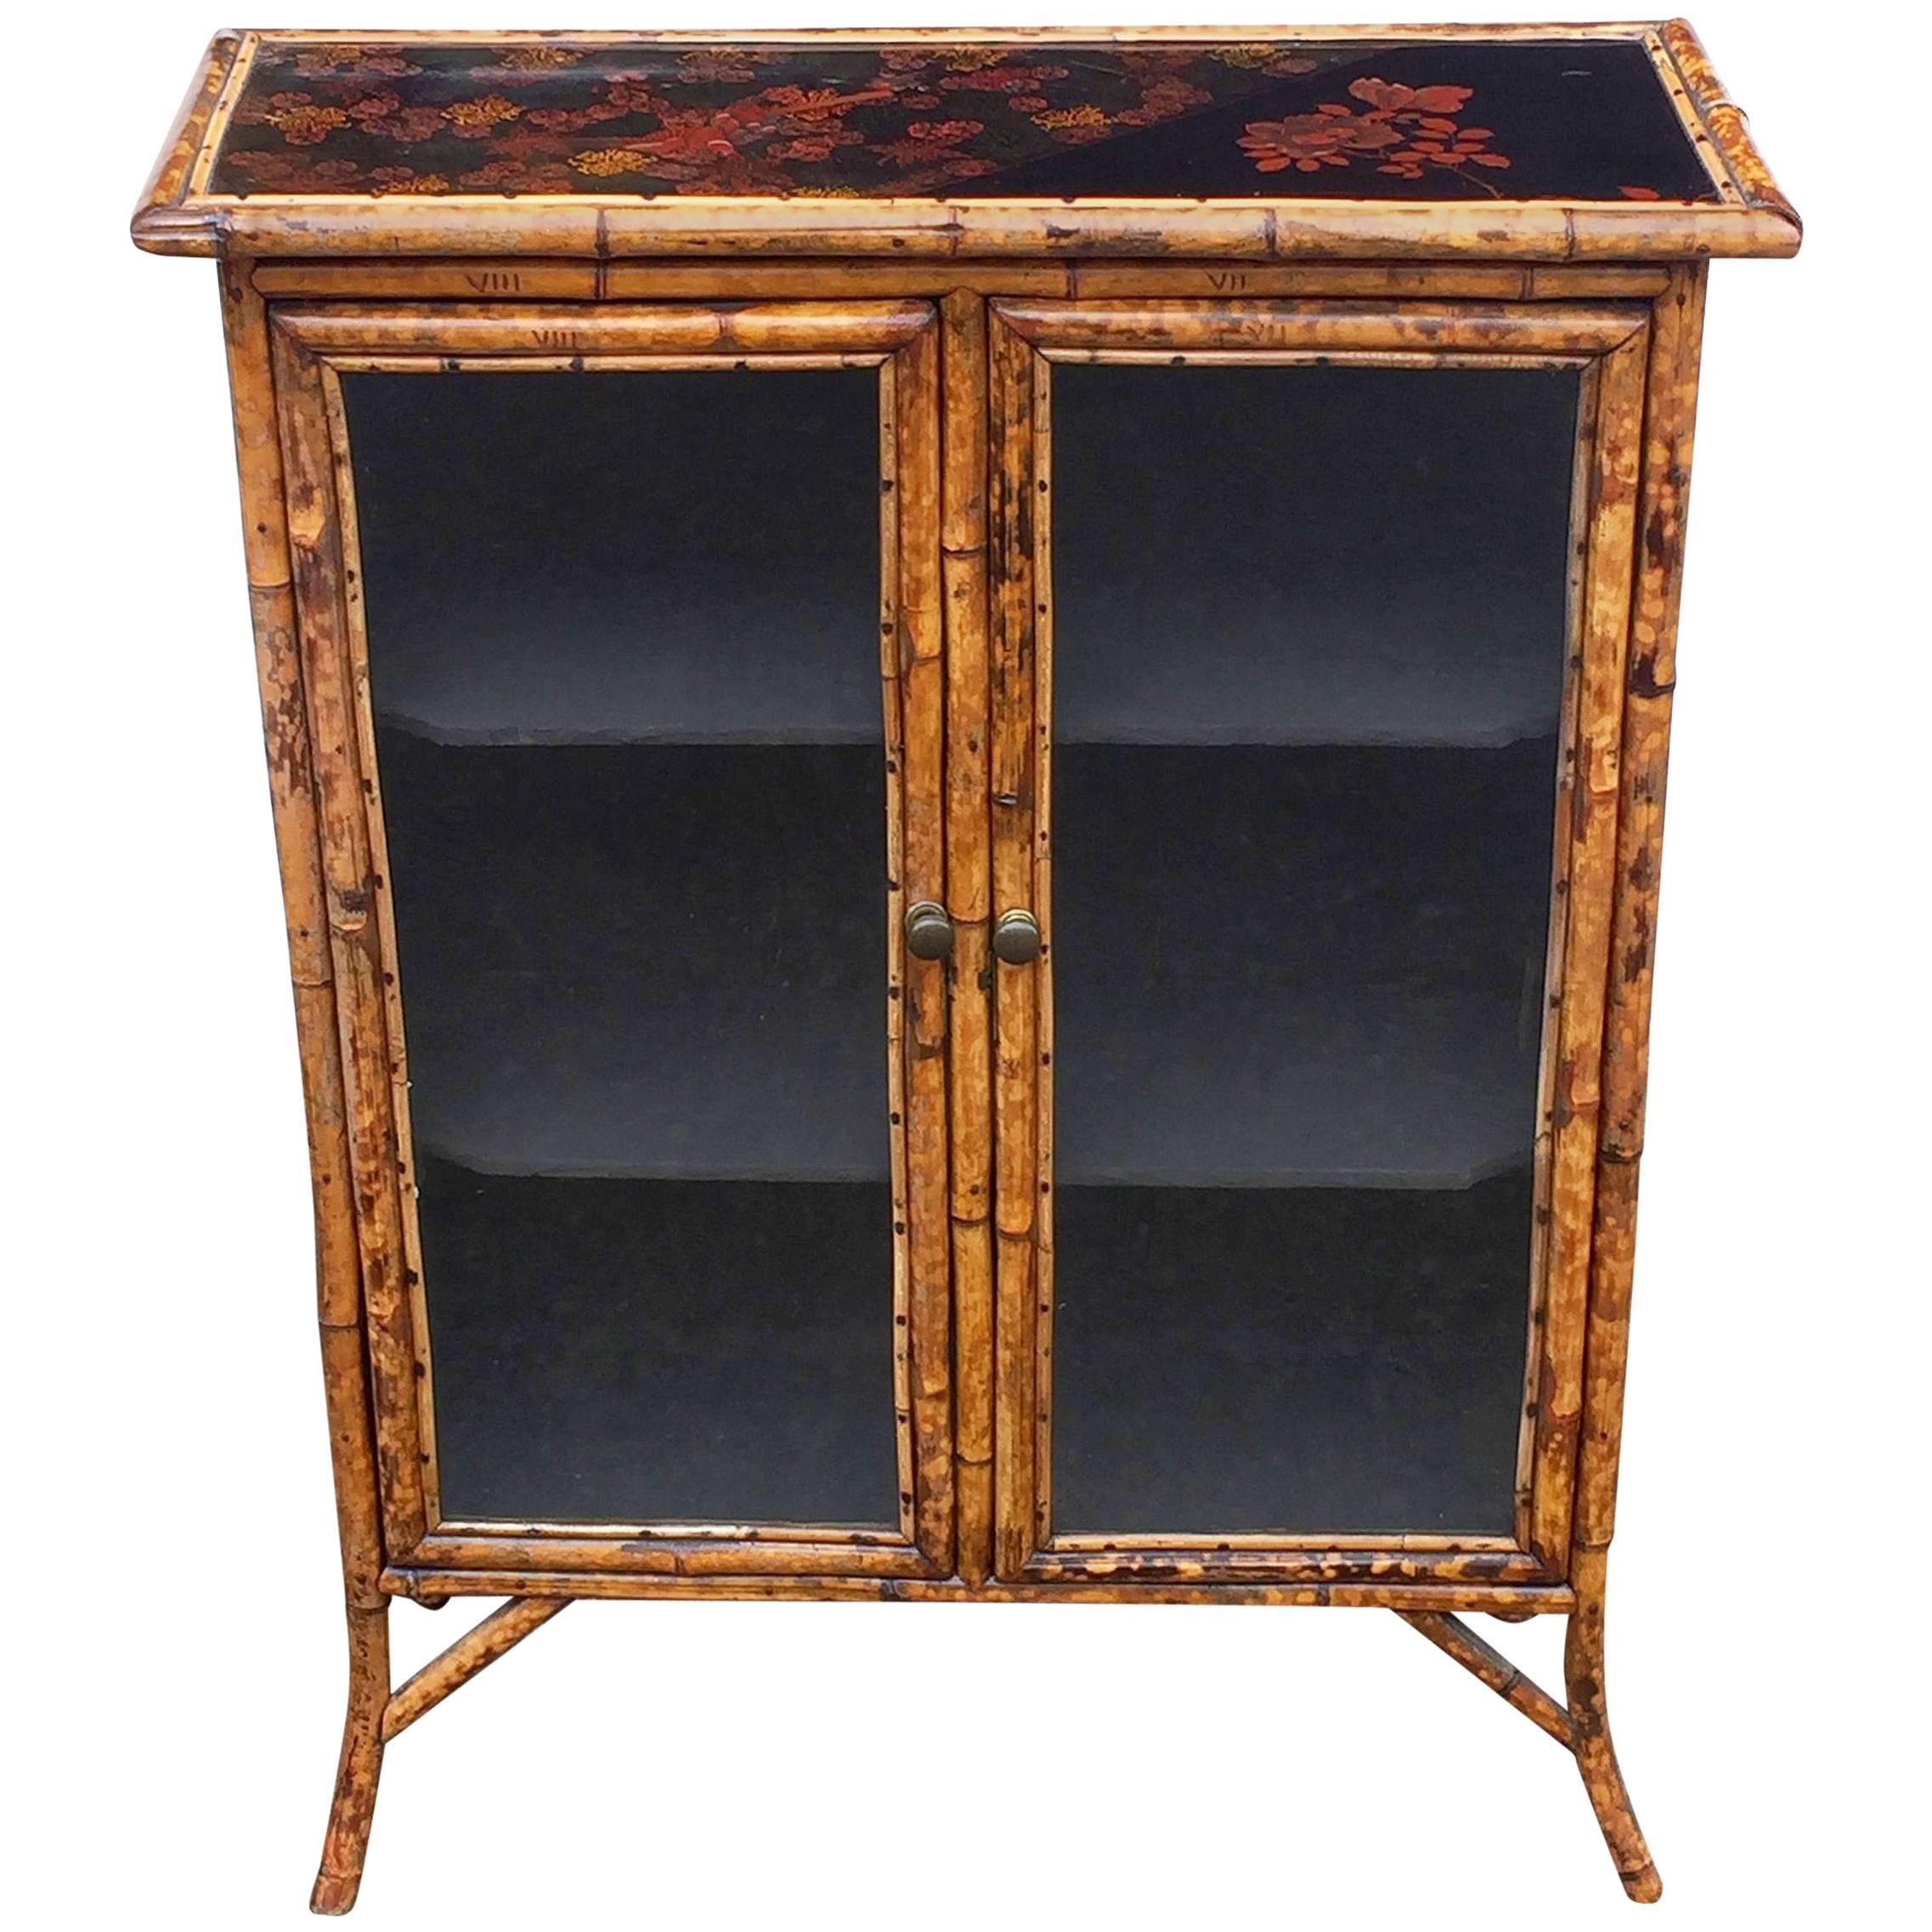 English Bamboo and Lacquer Cabinet Bookcase with Two Glass Doors